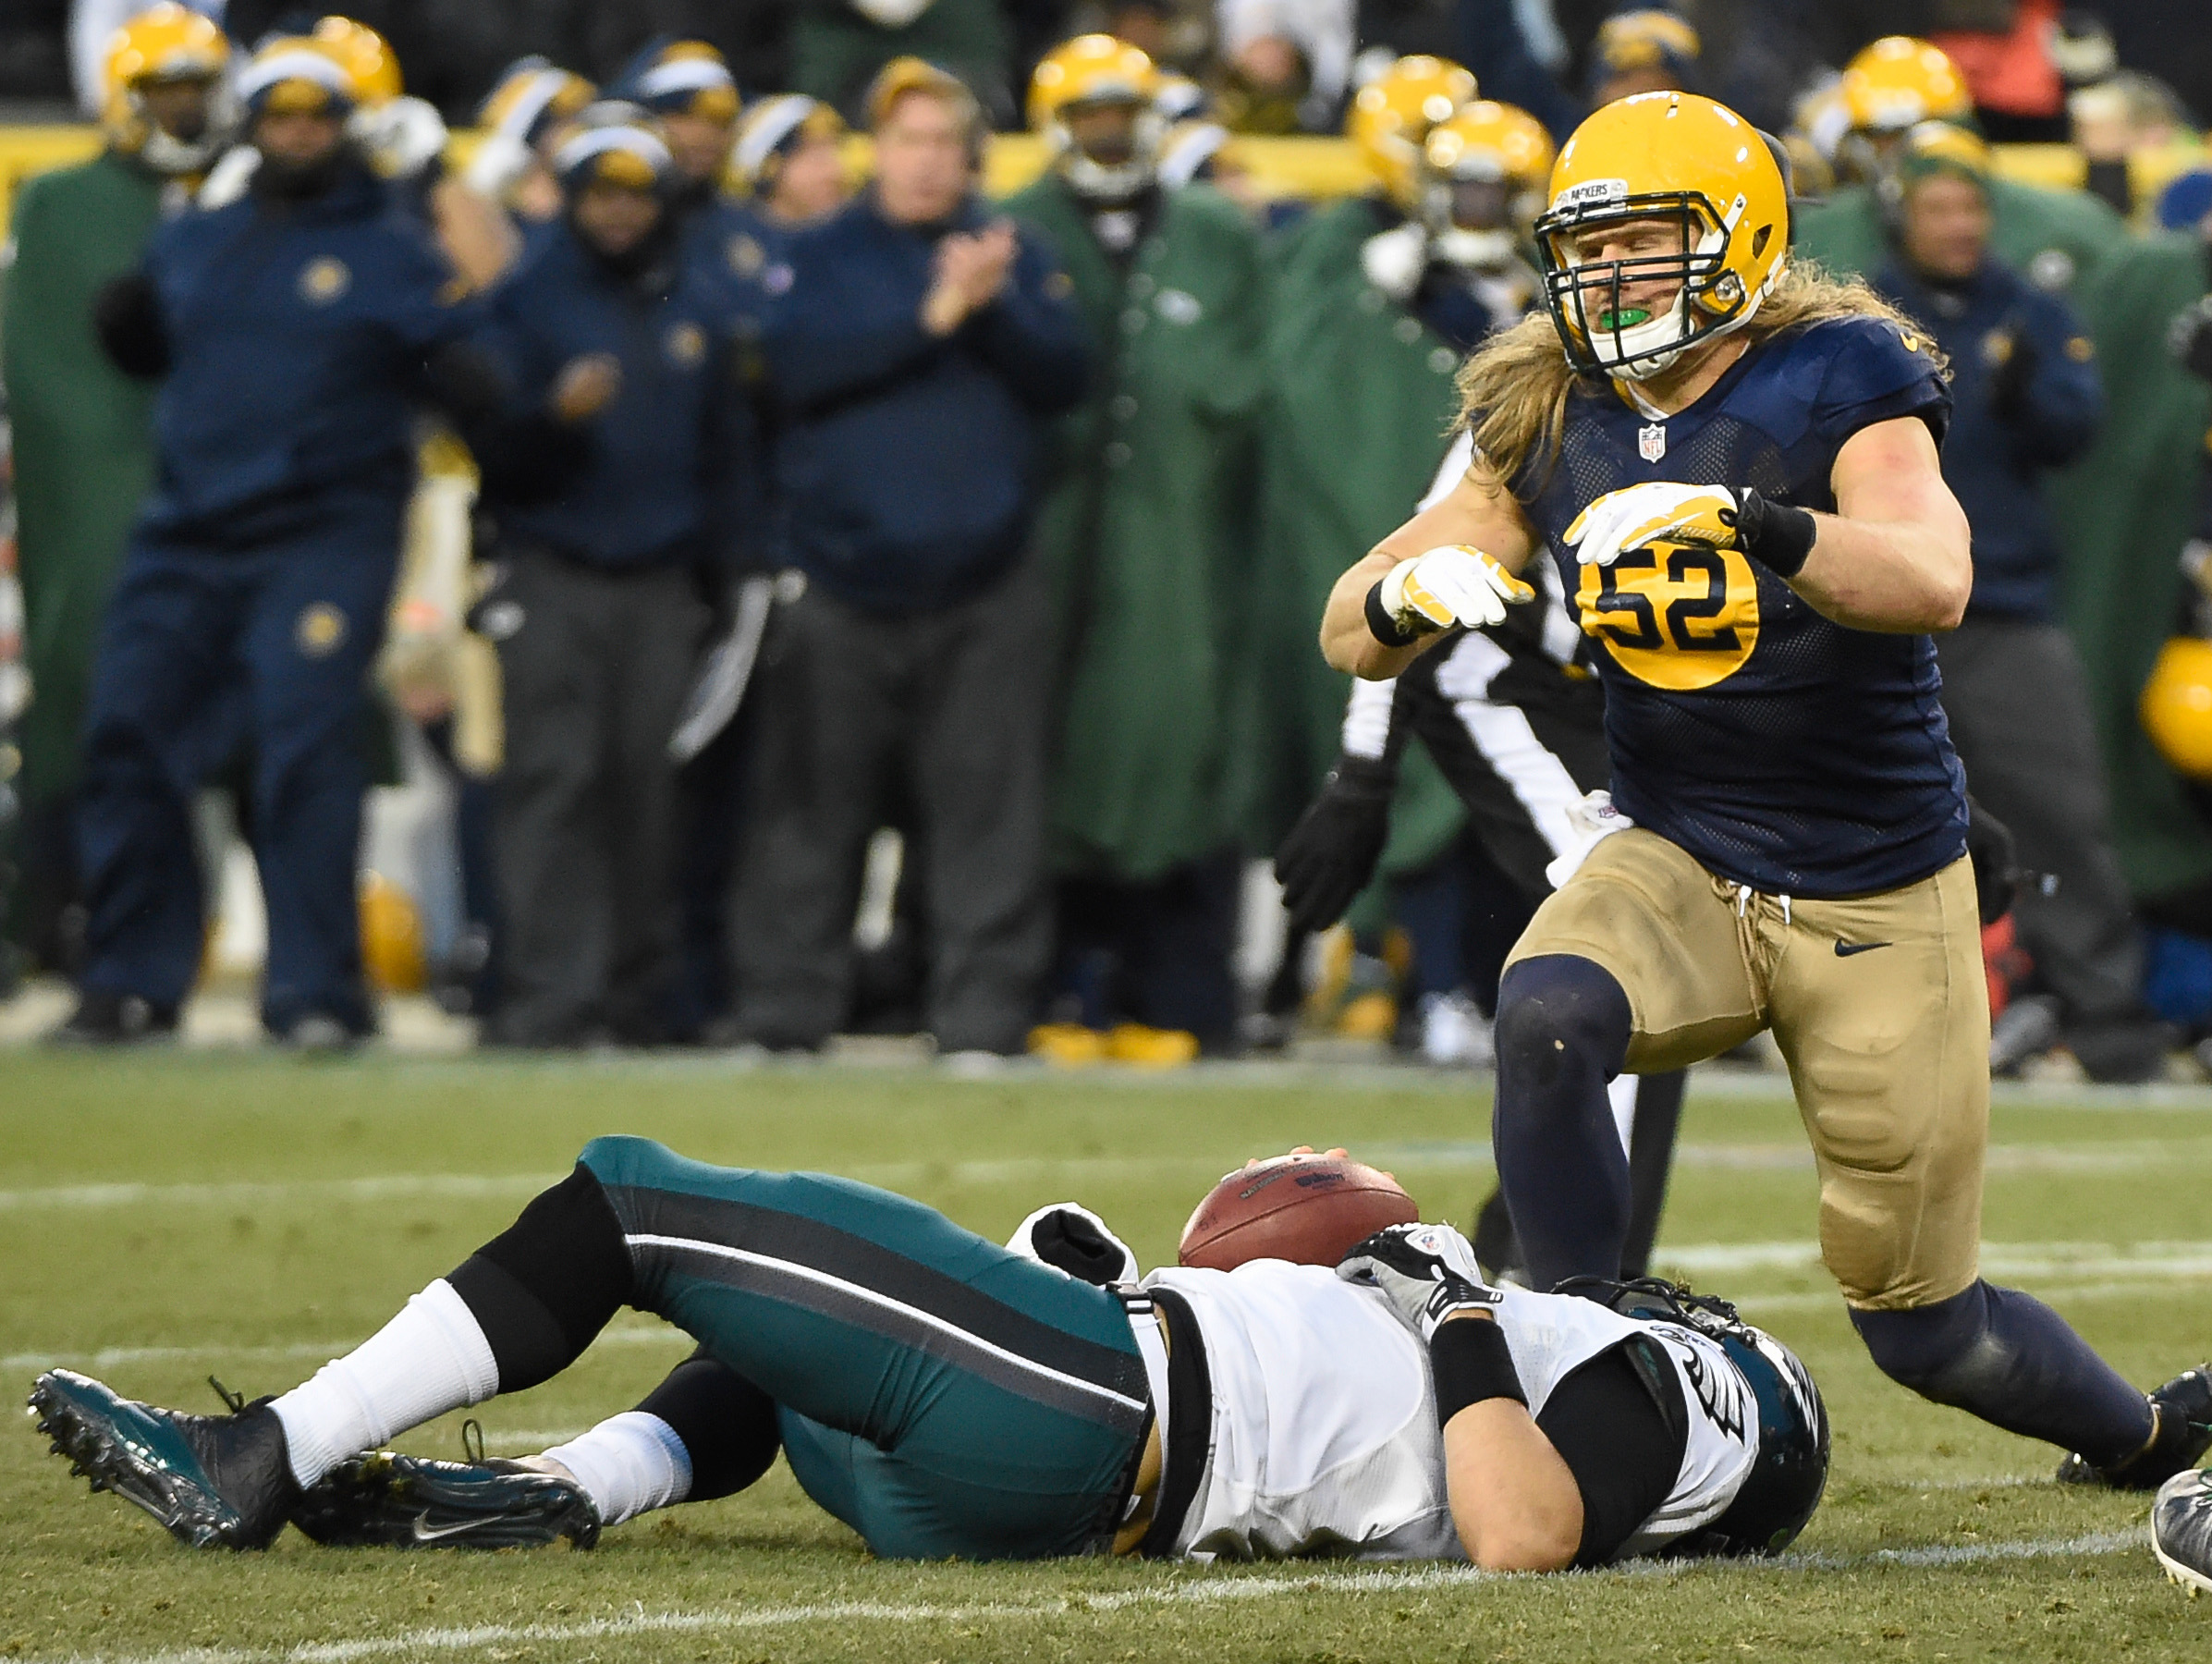 Green Bay Packers linebacker Clay Matthews (52) reacts after sacking Philadelphia Eagles quarterback Mark Sanchez (3) in the second quarter. (Benny Sieu, USA TODAY Sports)